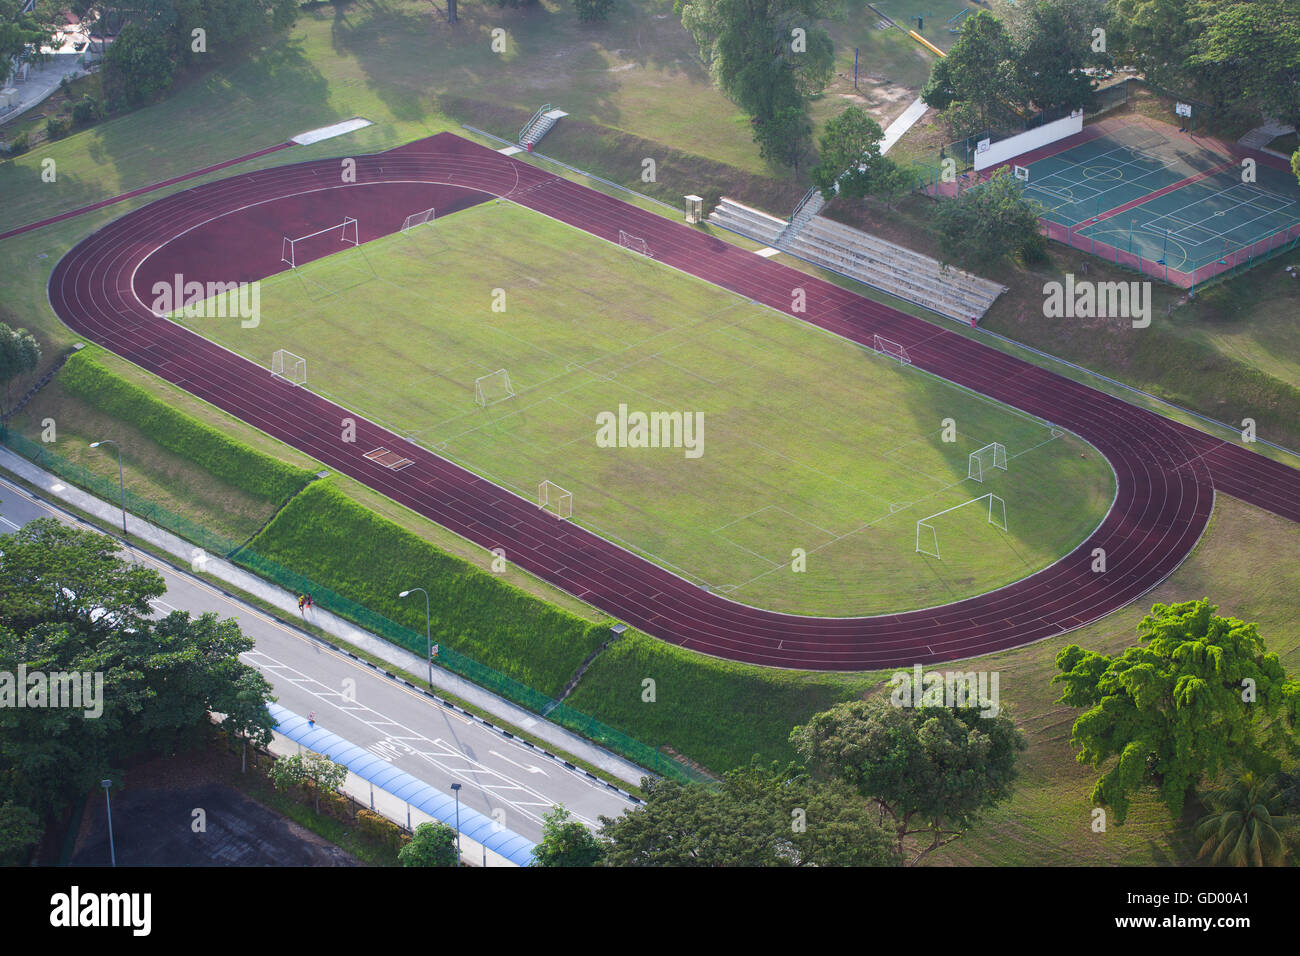 Aerial view of a school football field, two tennis court and 